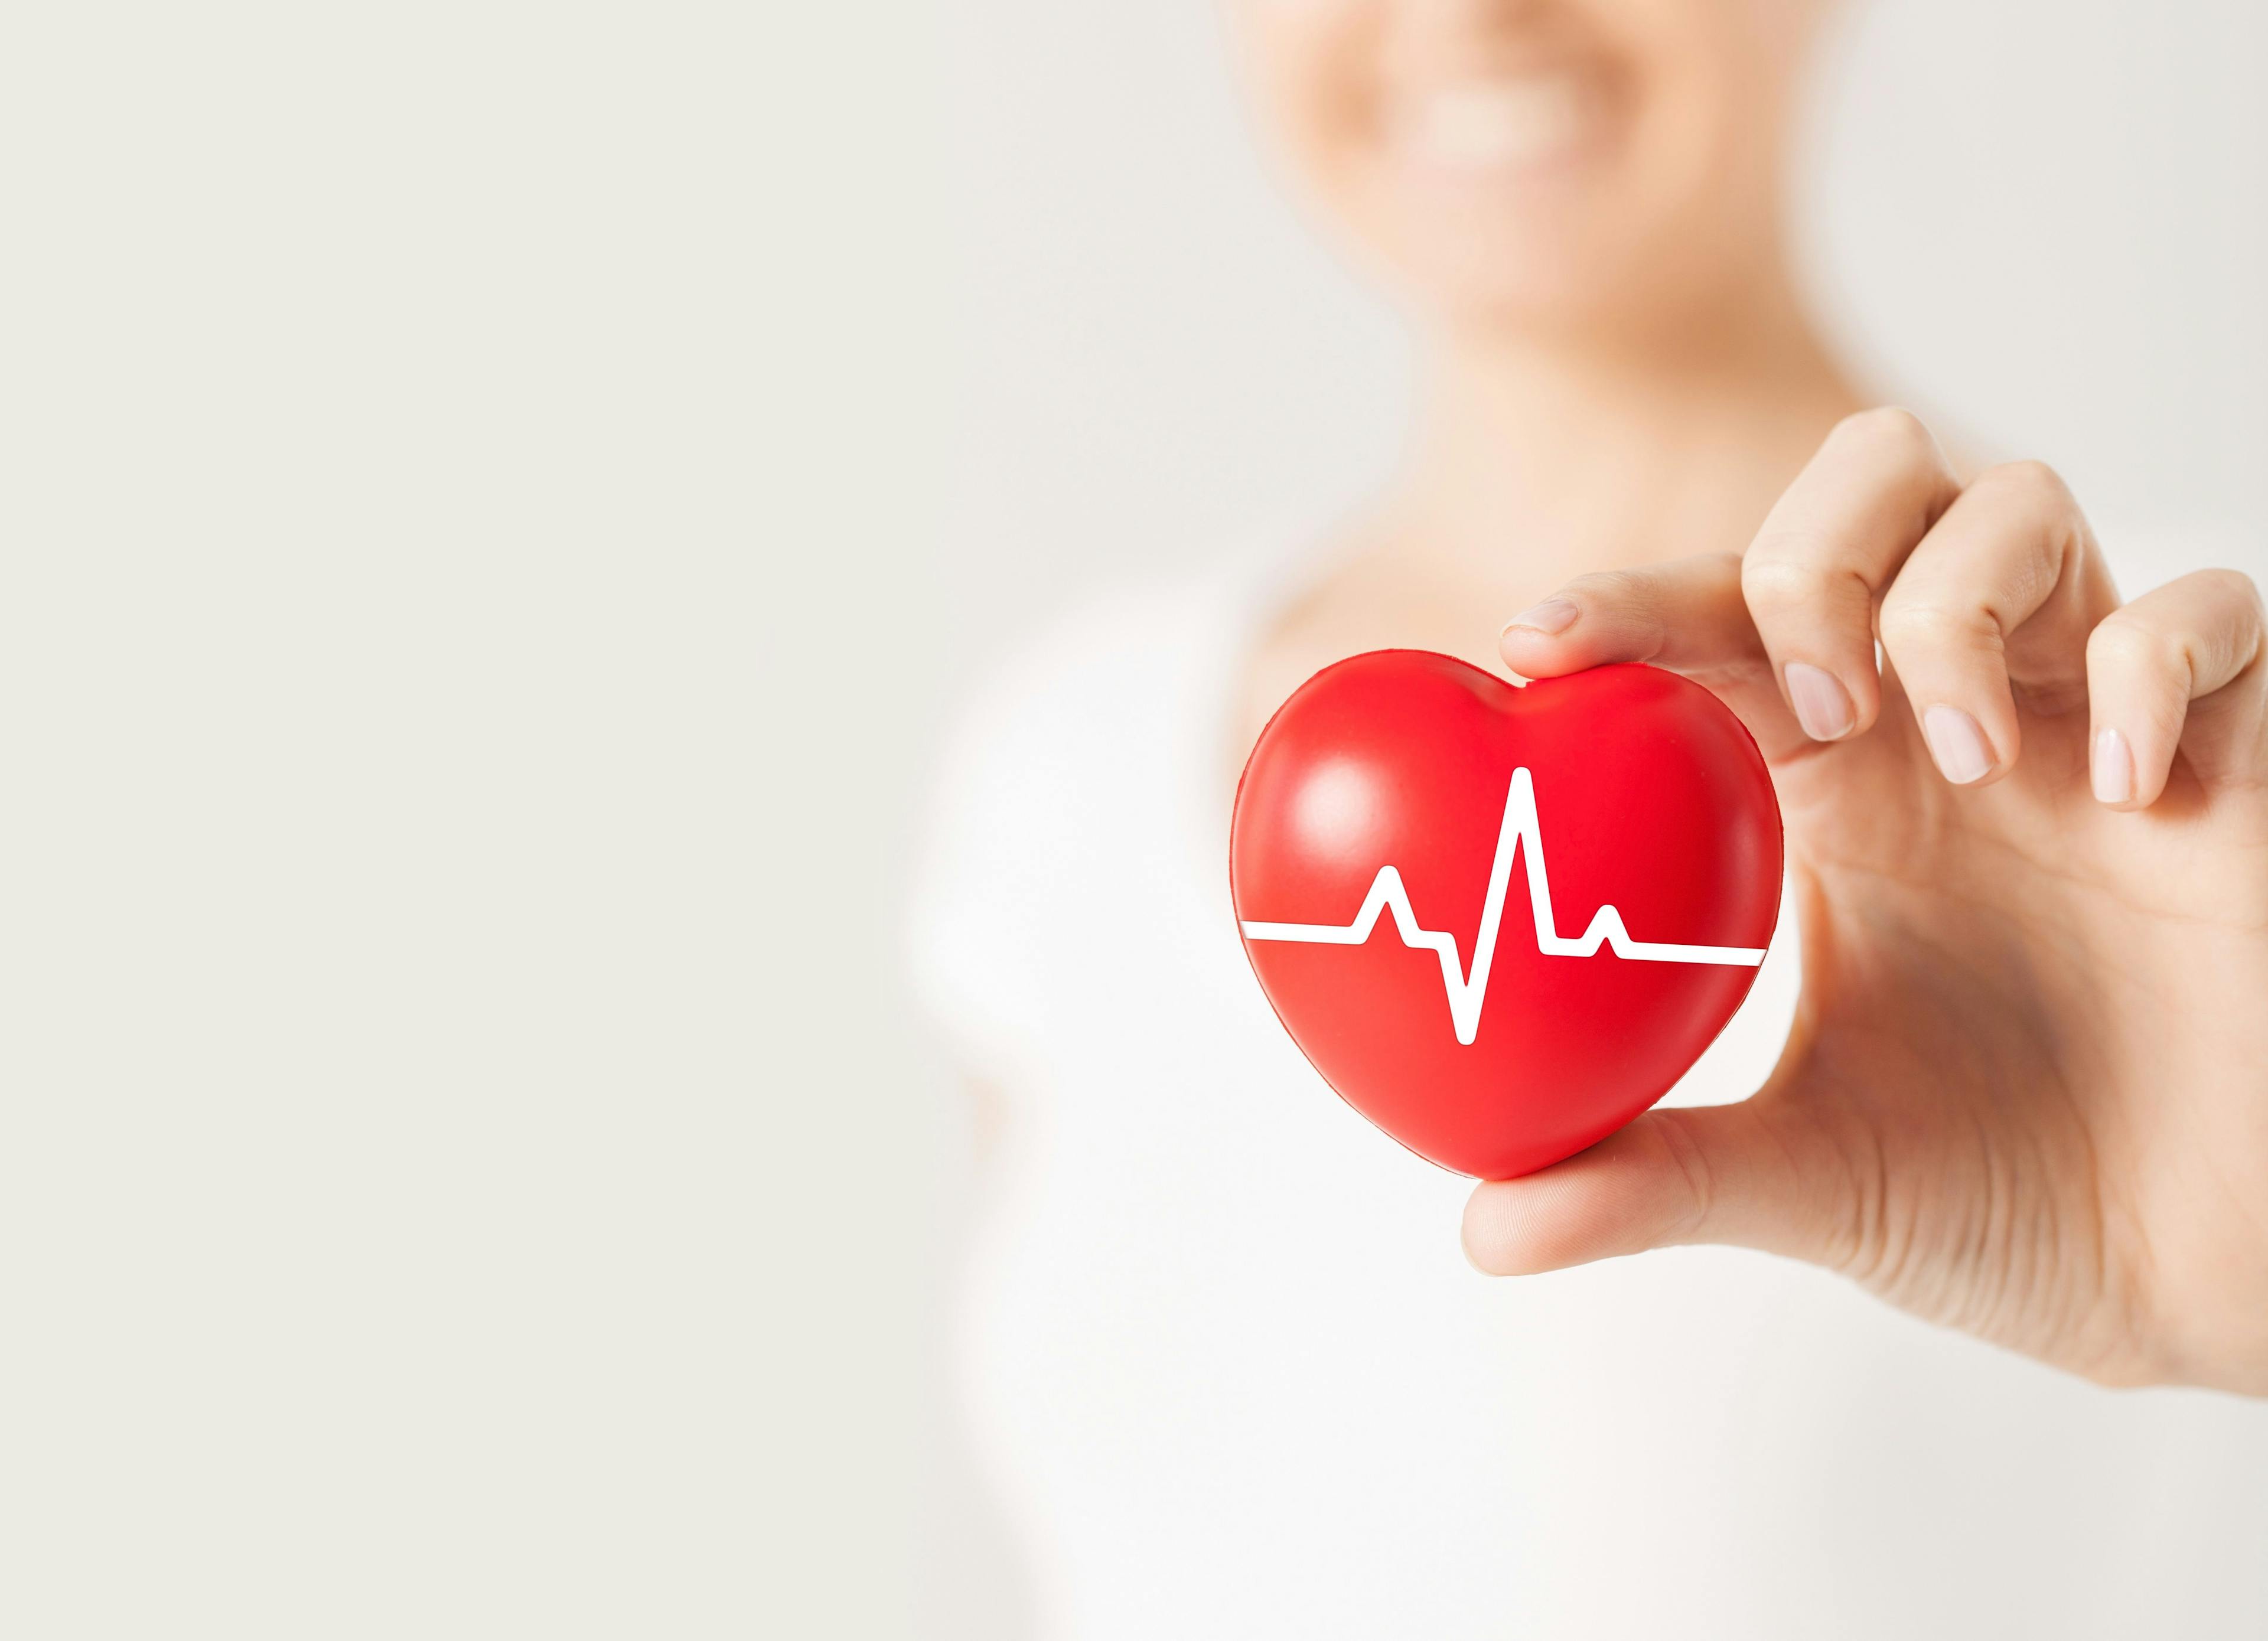 Women Diagnosed With Breast Cancer Are More Likely to Have Abnormal Heart Rhythm